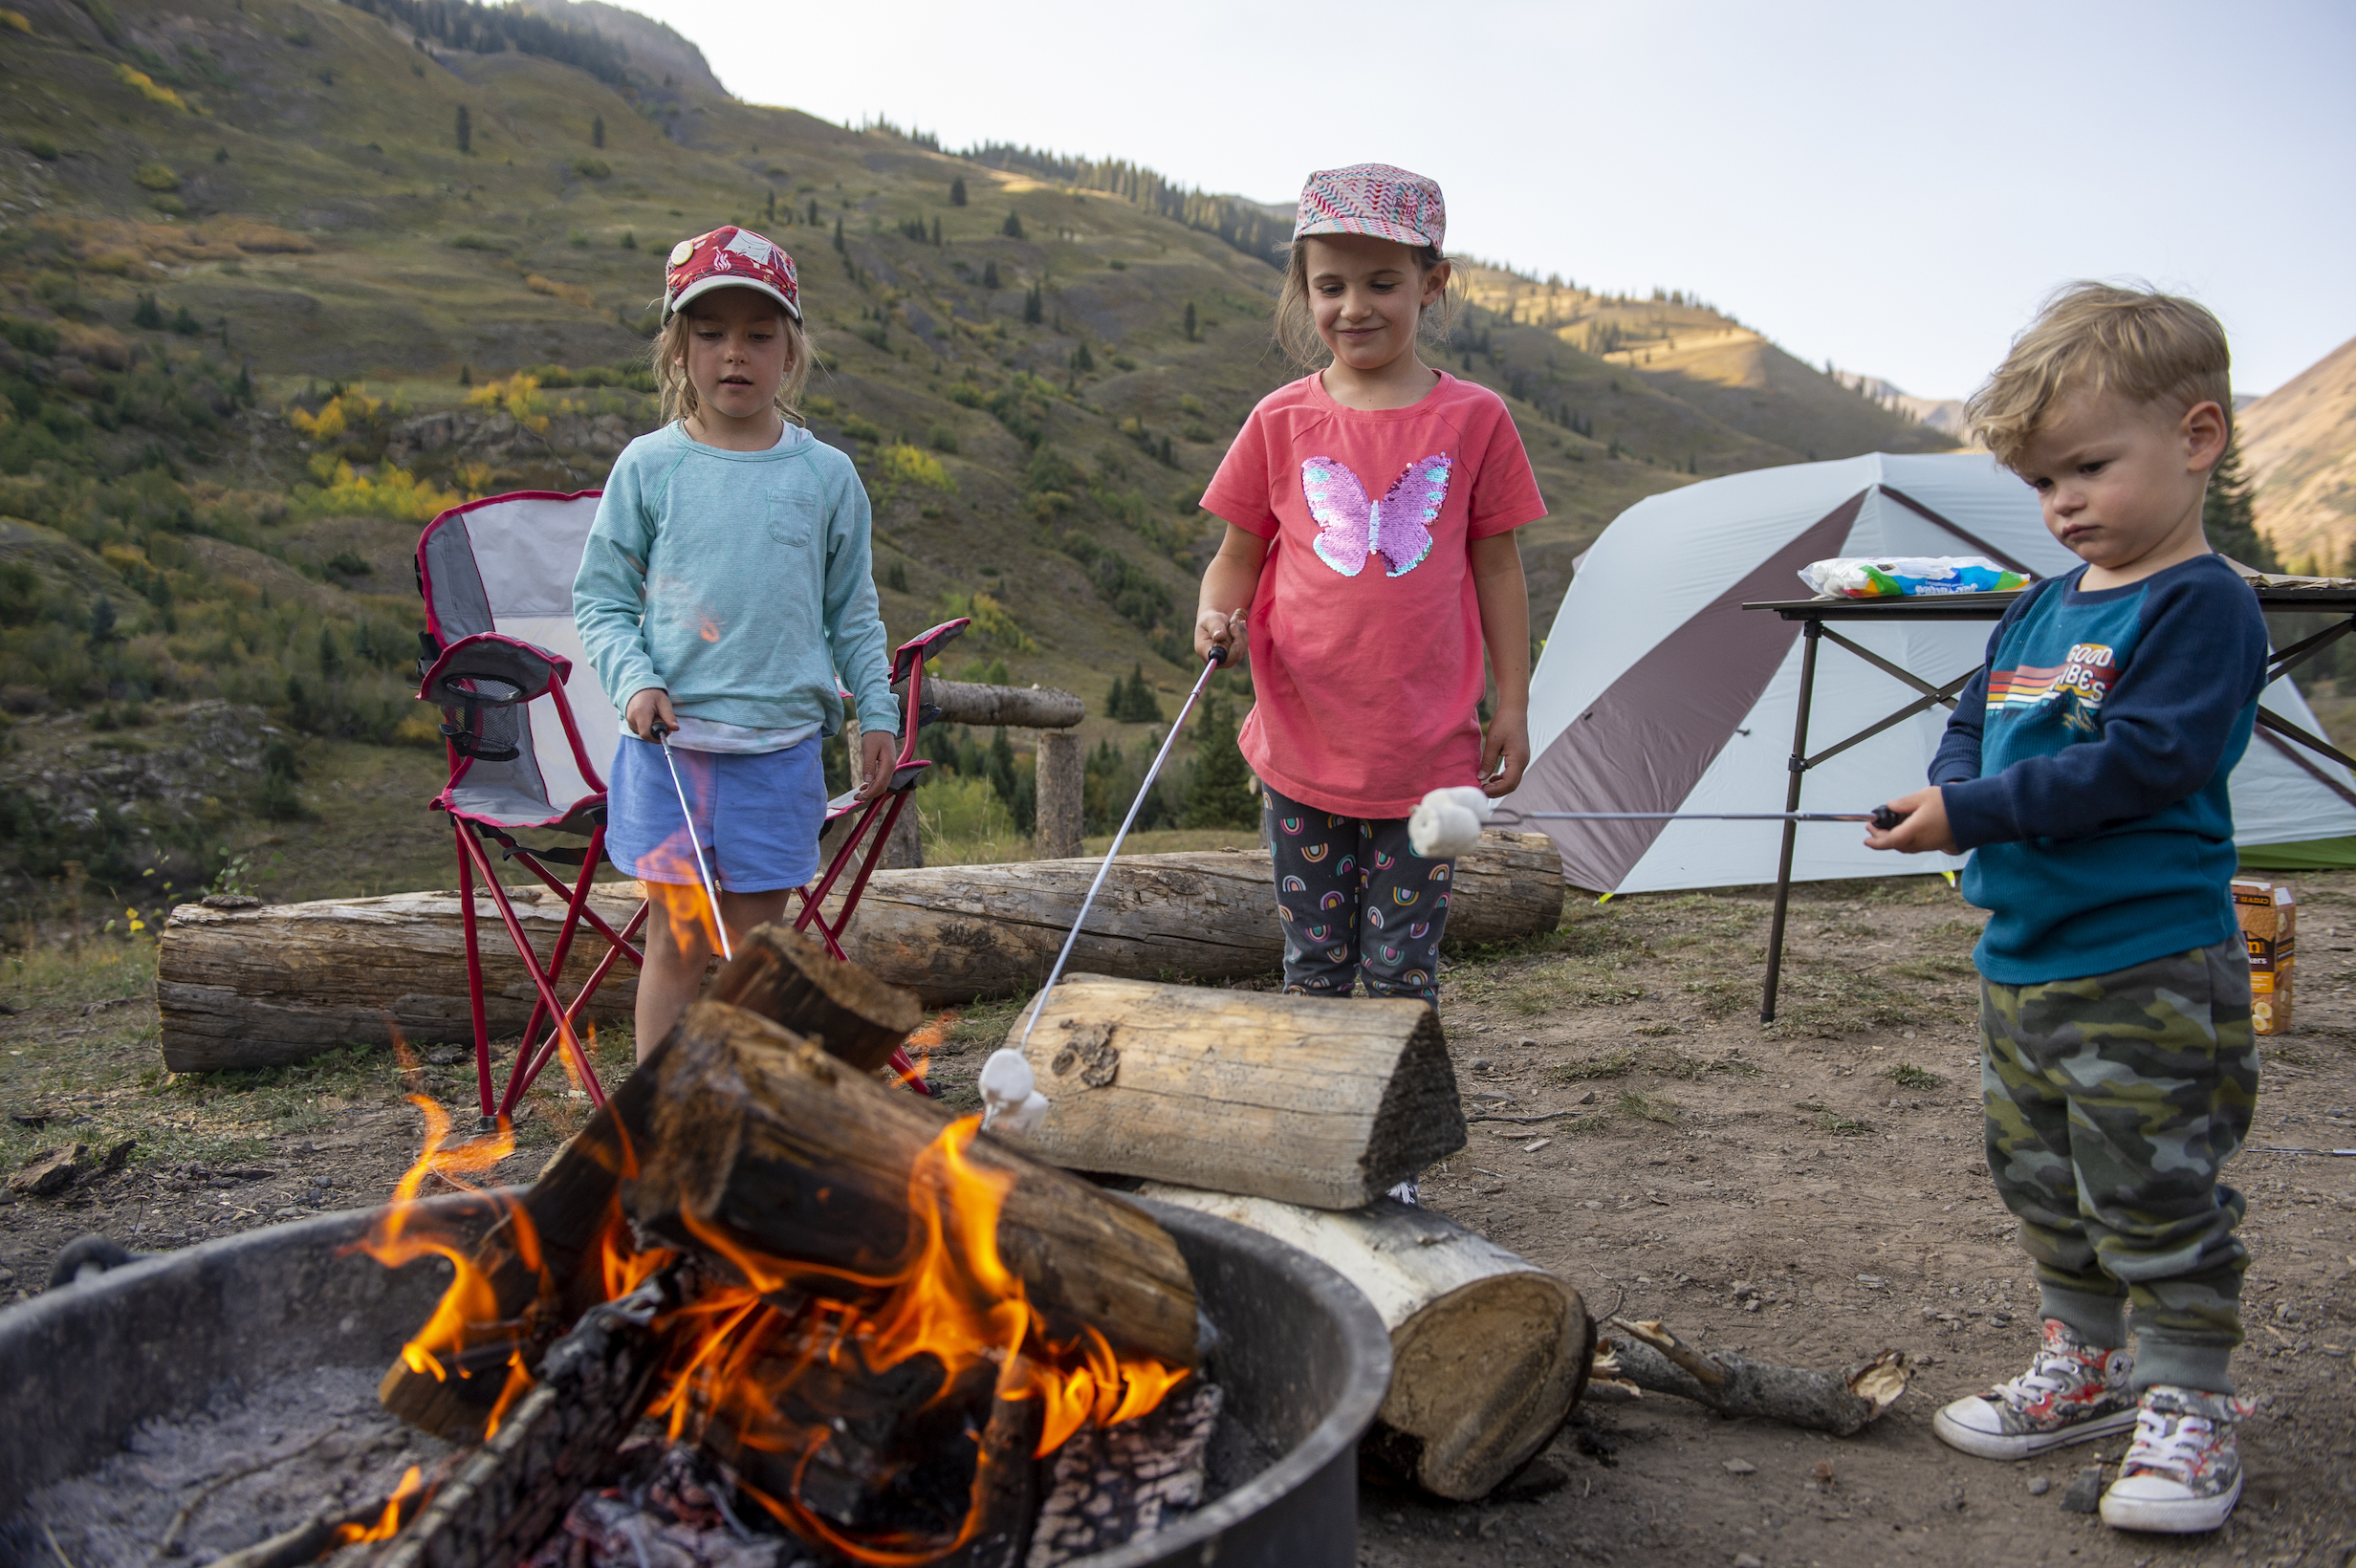 Family camping in a designated camping area.
Slate River Valley
Crested Butte, CO